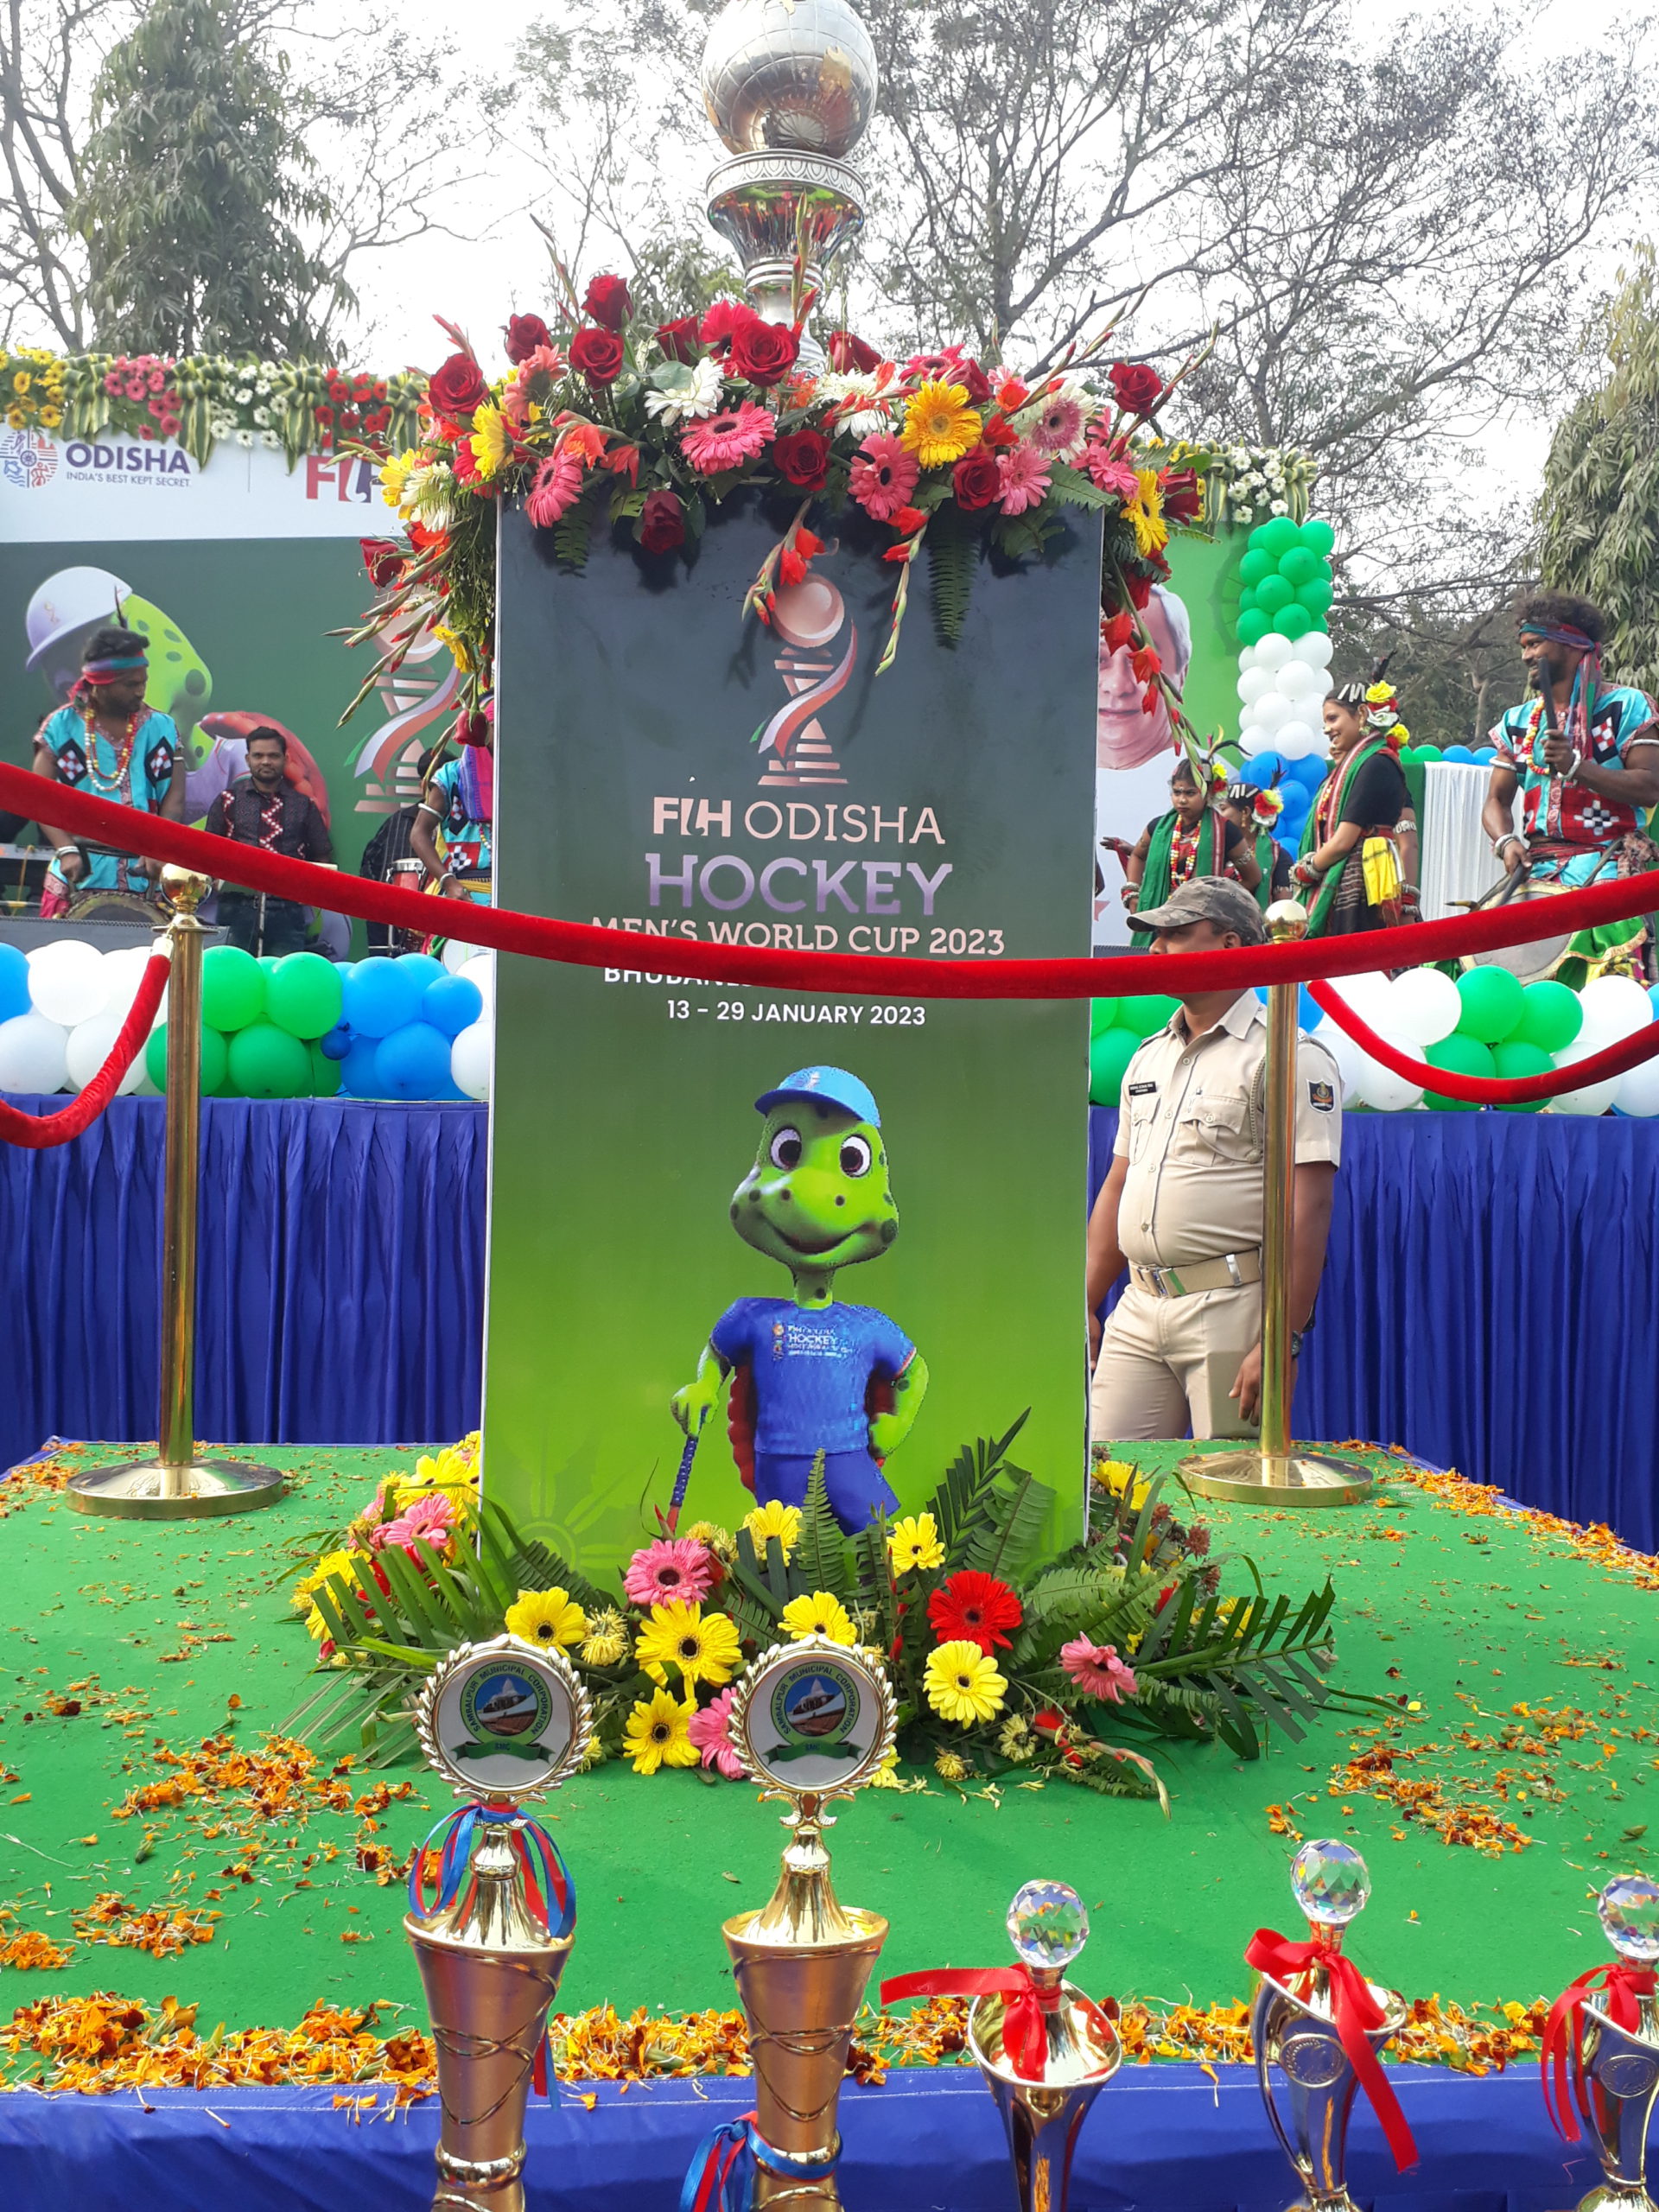 Welocomed to Hockey World Cup Trophy in sambalpur